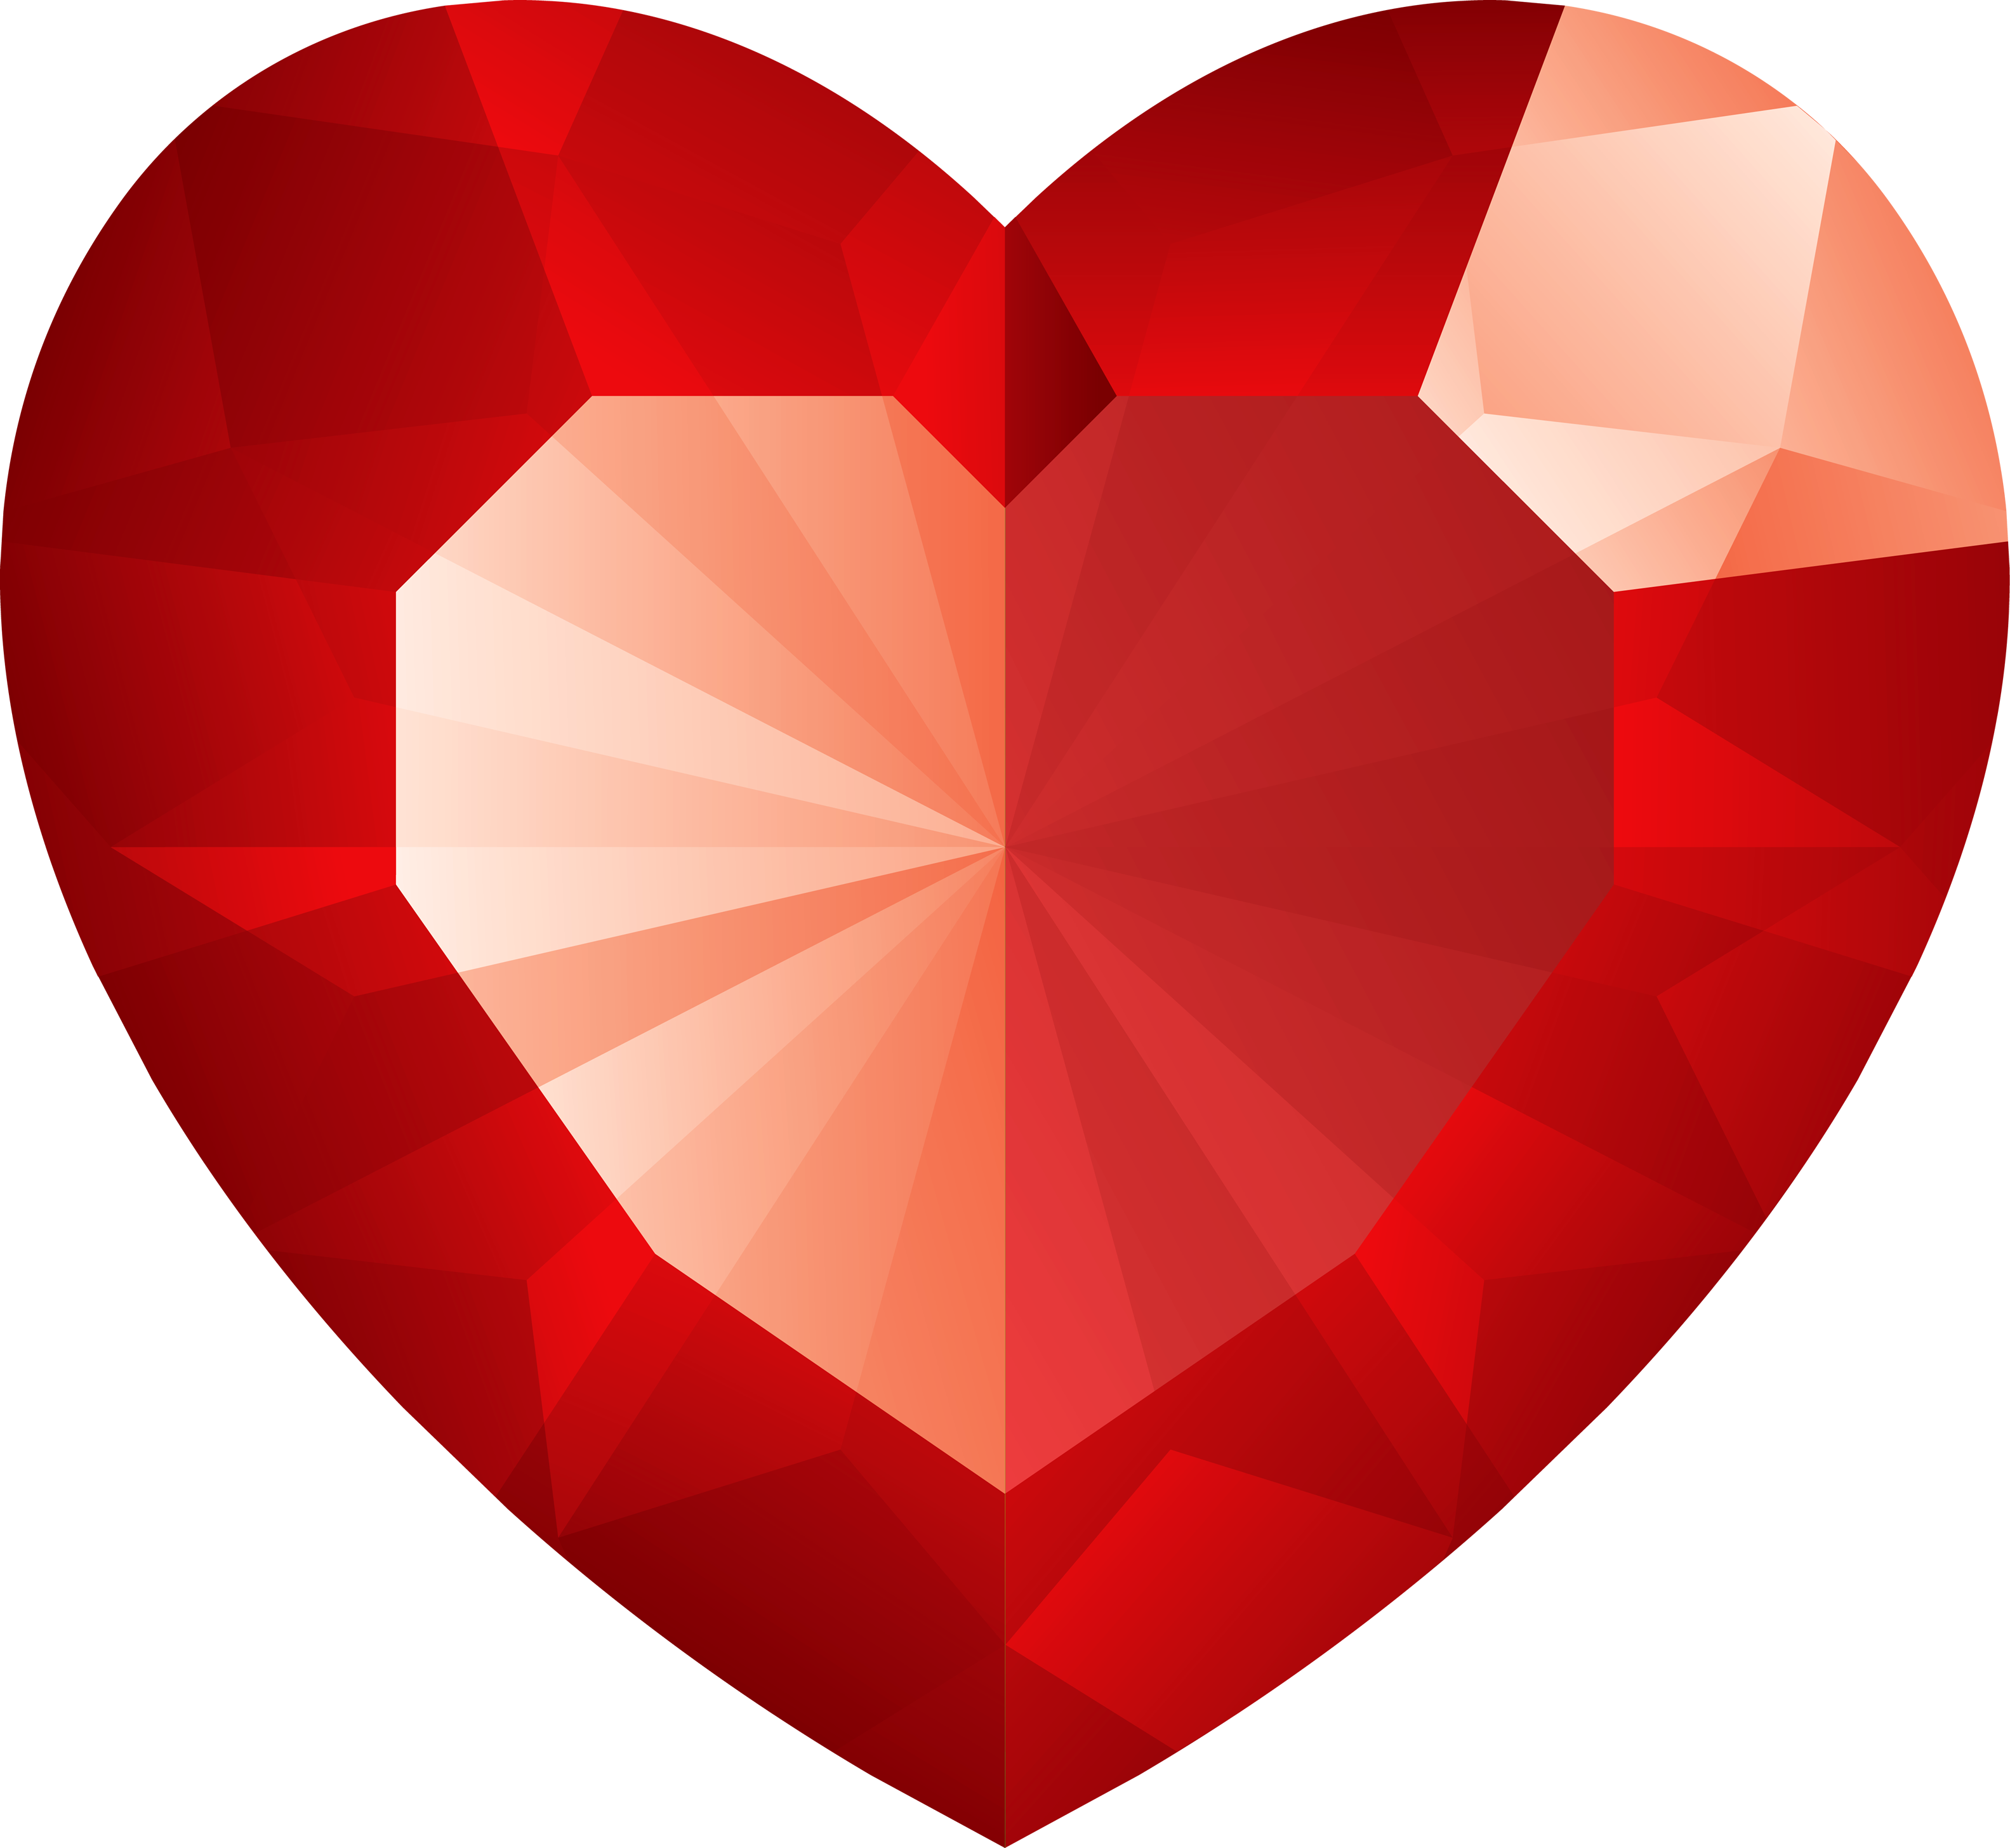 Heart PNG image, free download transparent image download, size: 3167x2912px